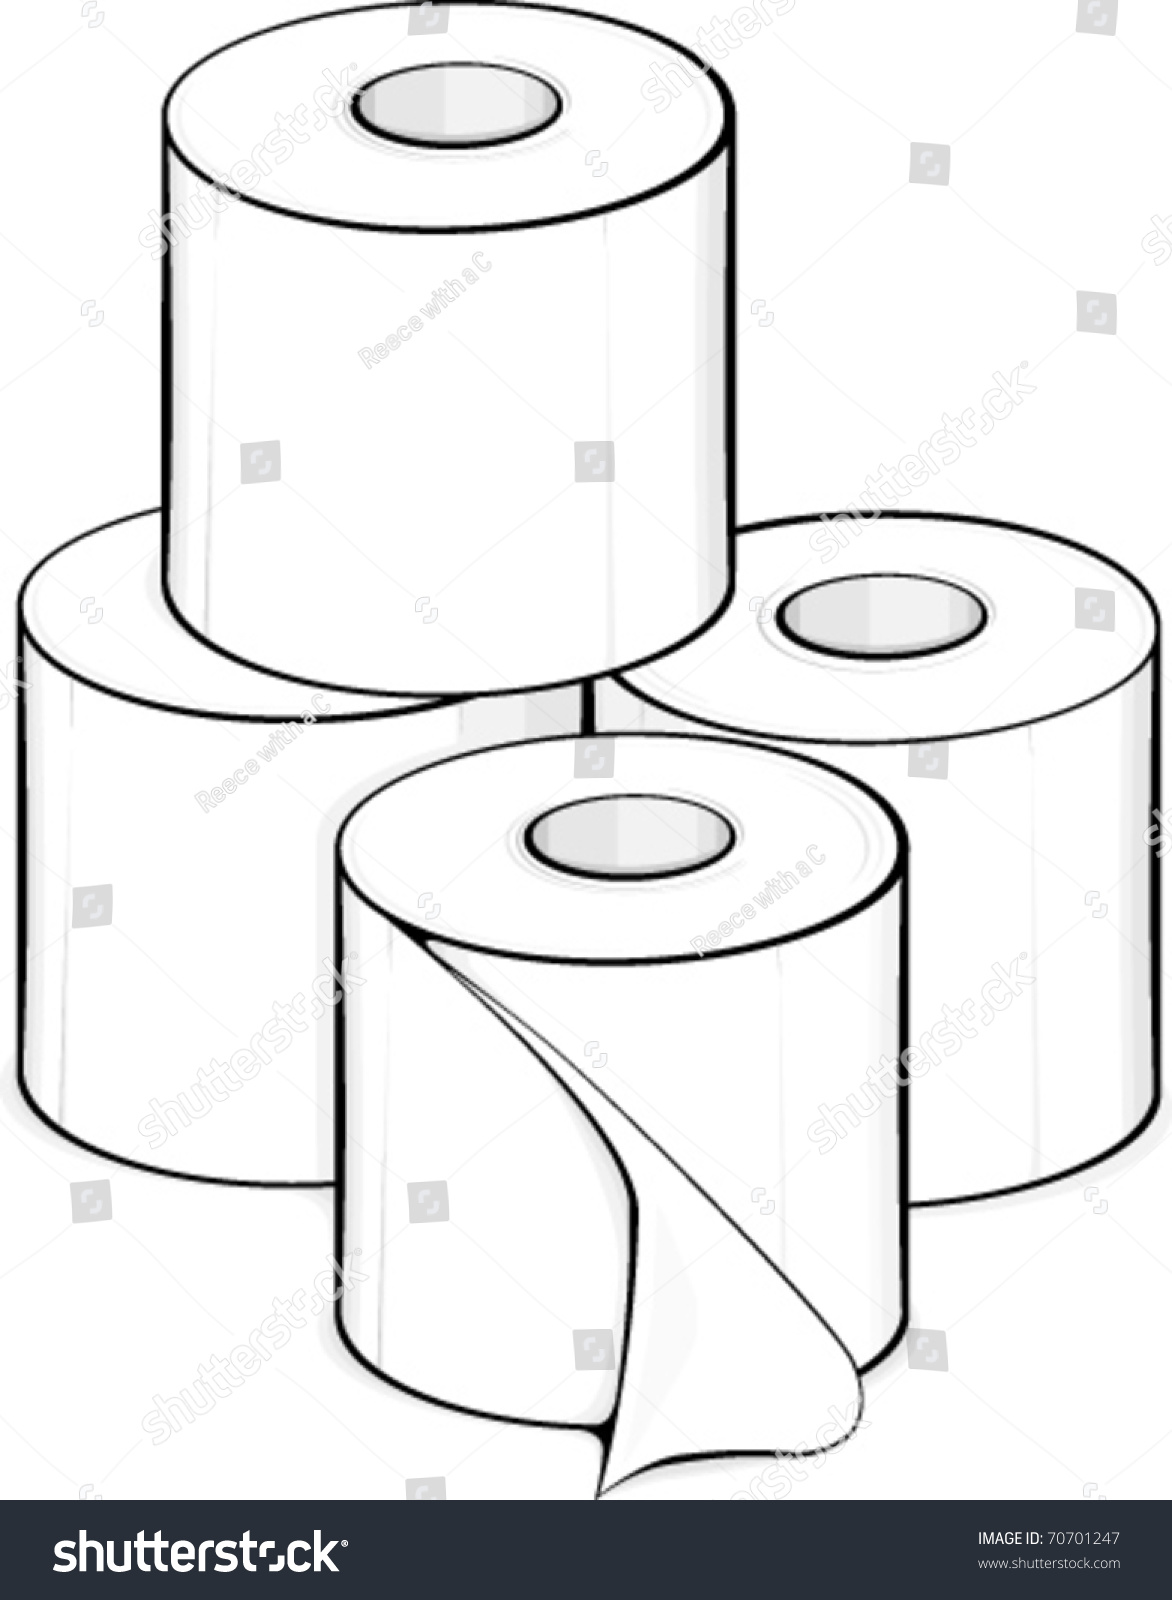 toilet roll clipart - photo #43